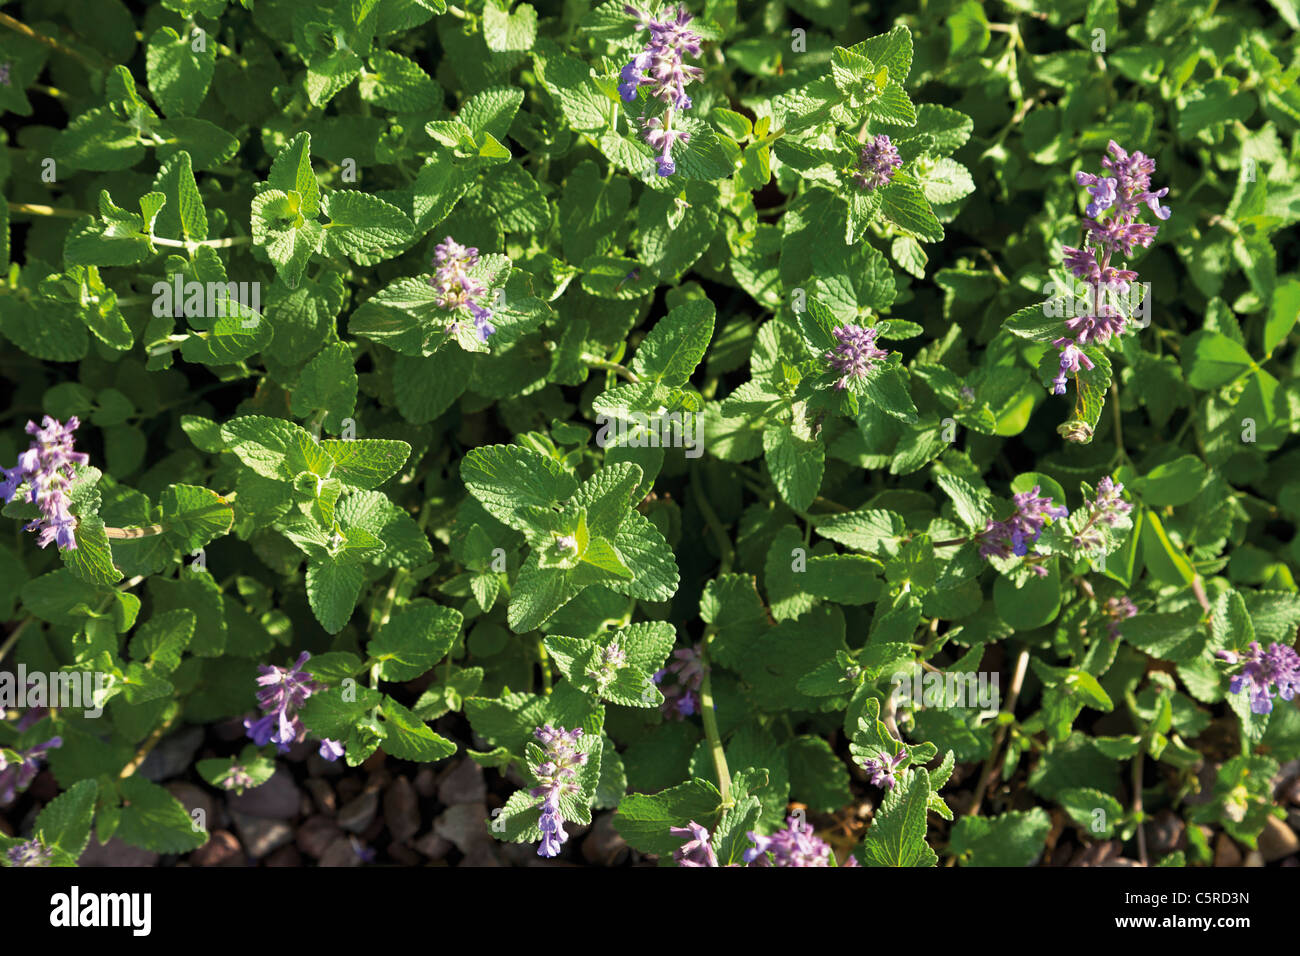 Germany, Close up of catmint plant Stock Photo